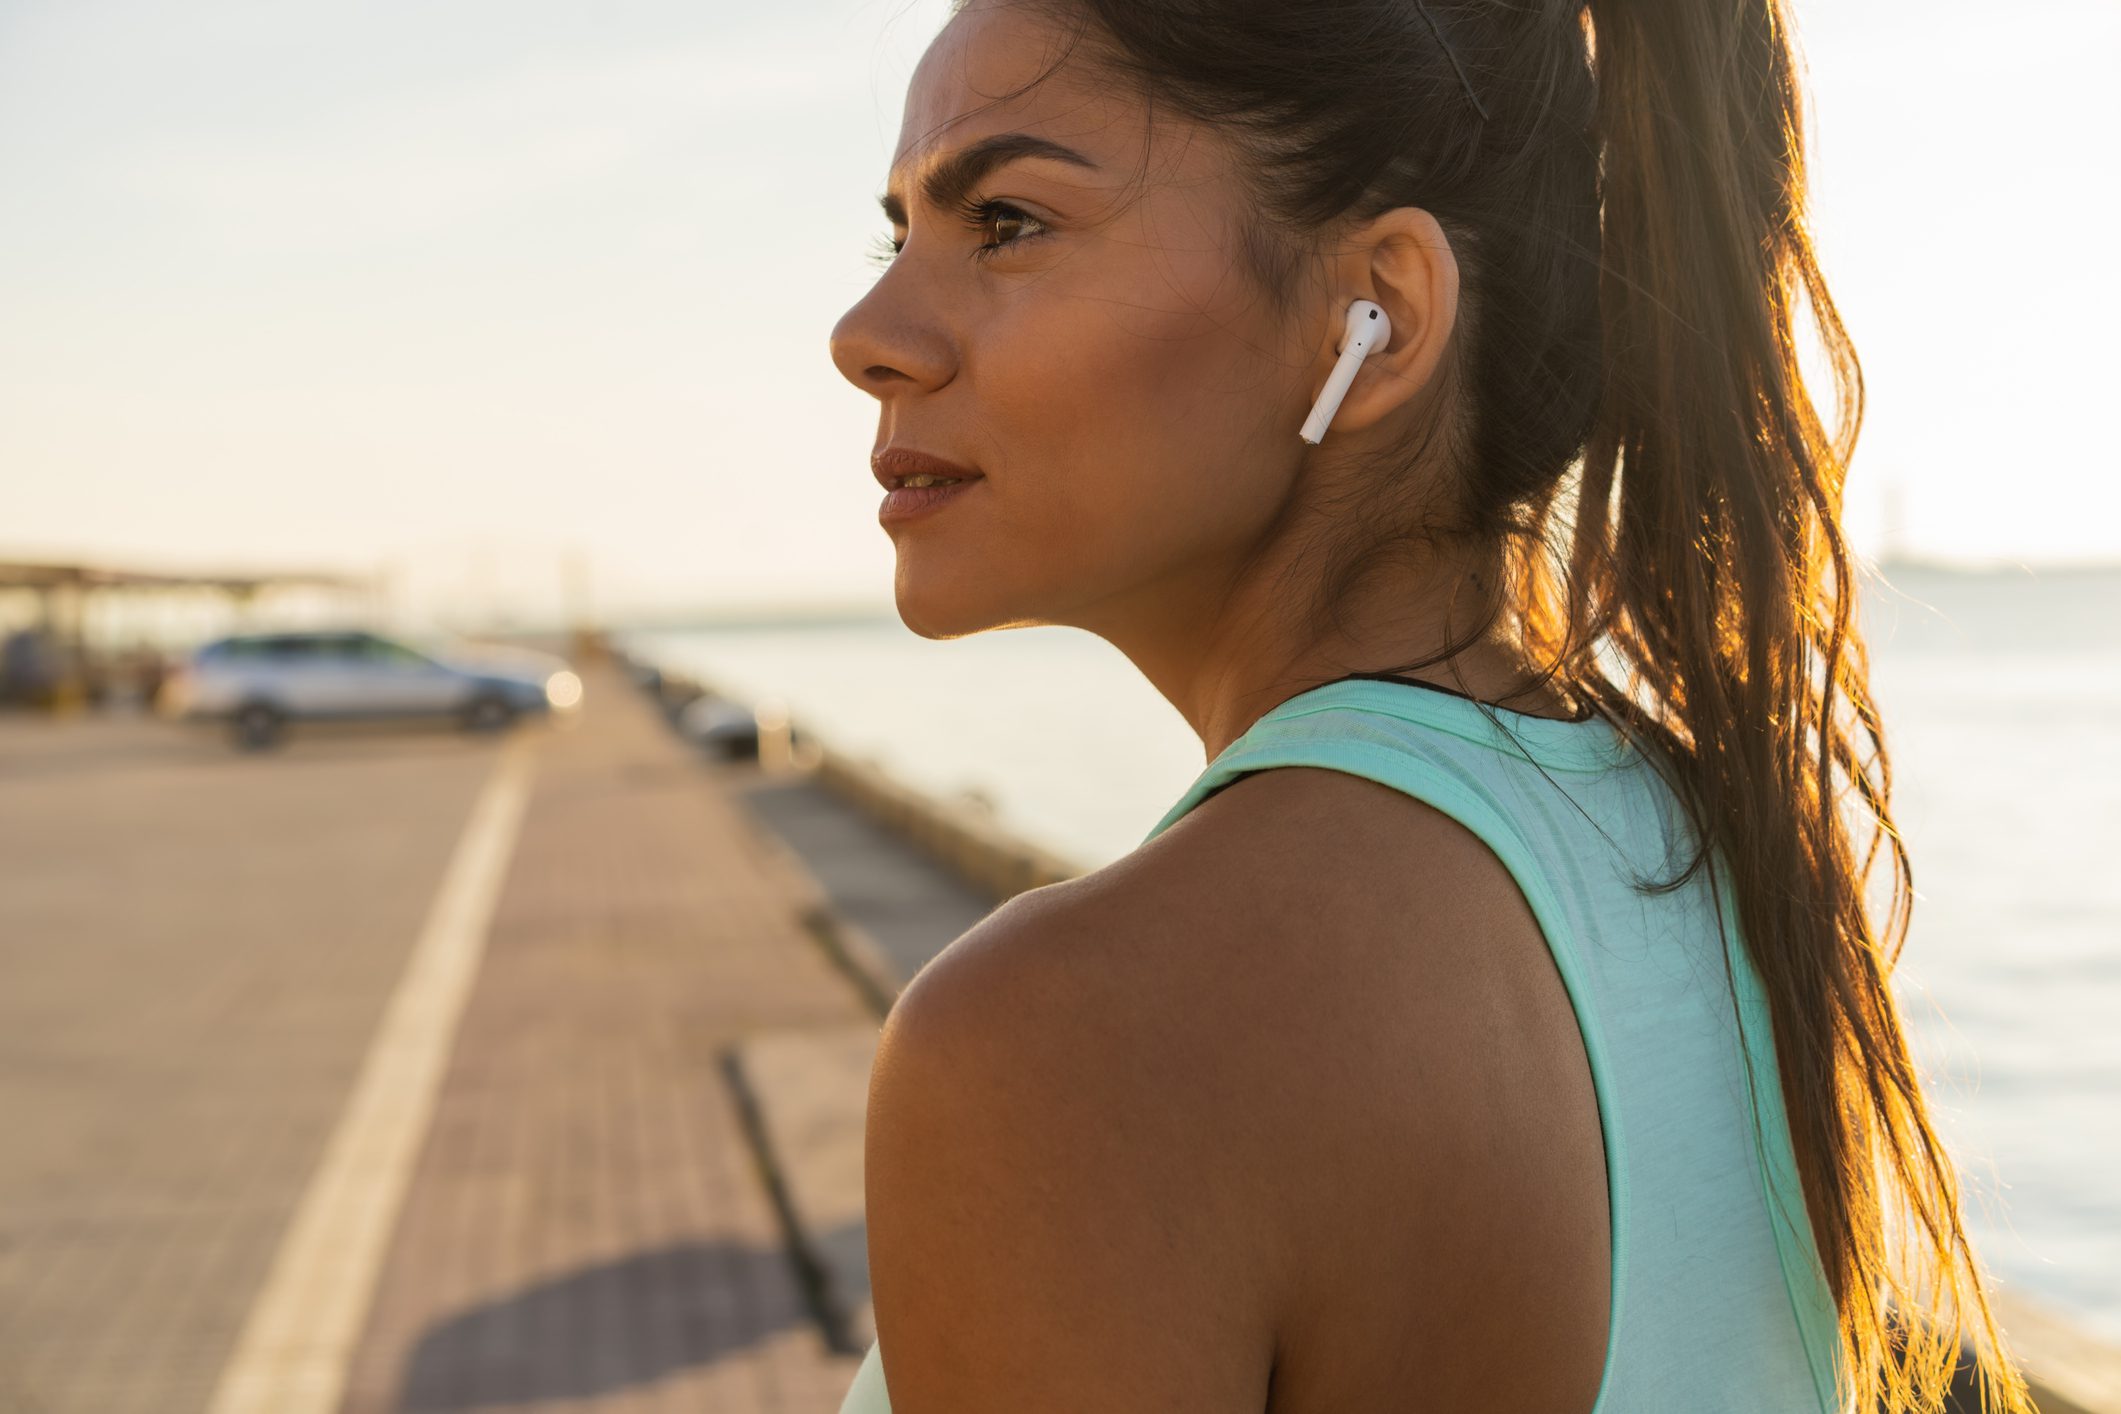 Spotify launches personalized BPM mixes to help you with your running cadence